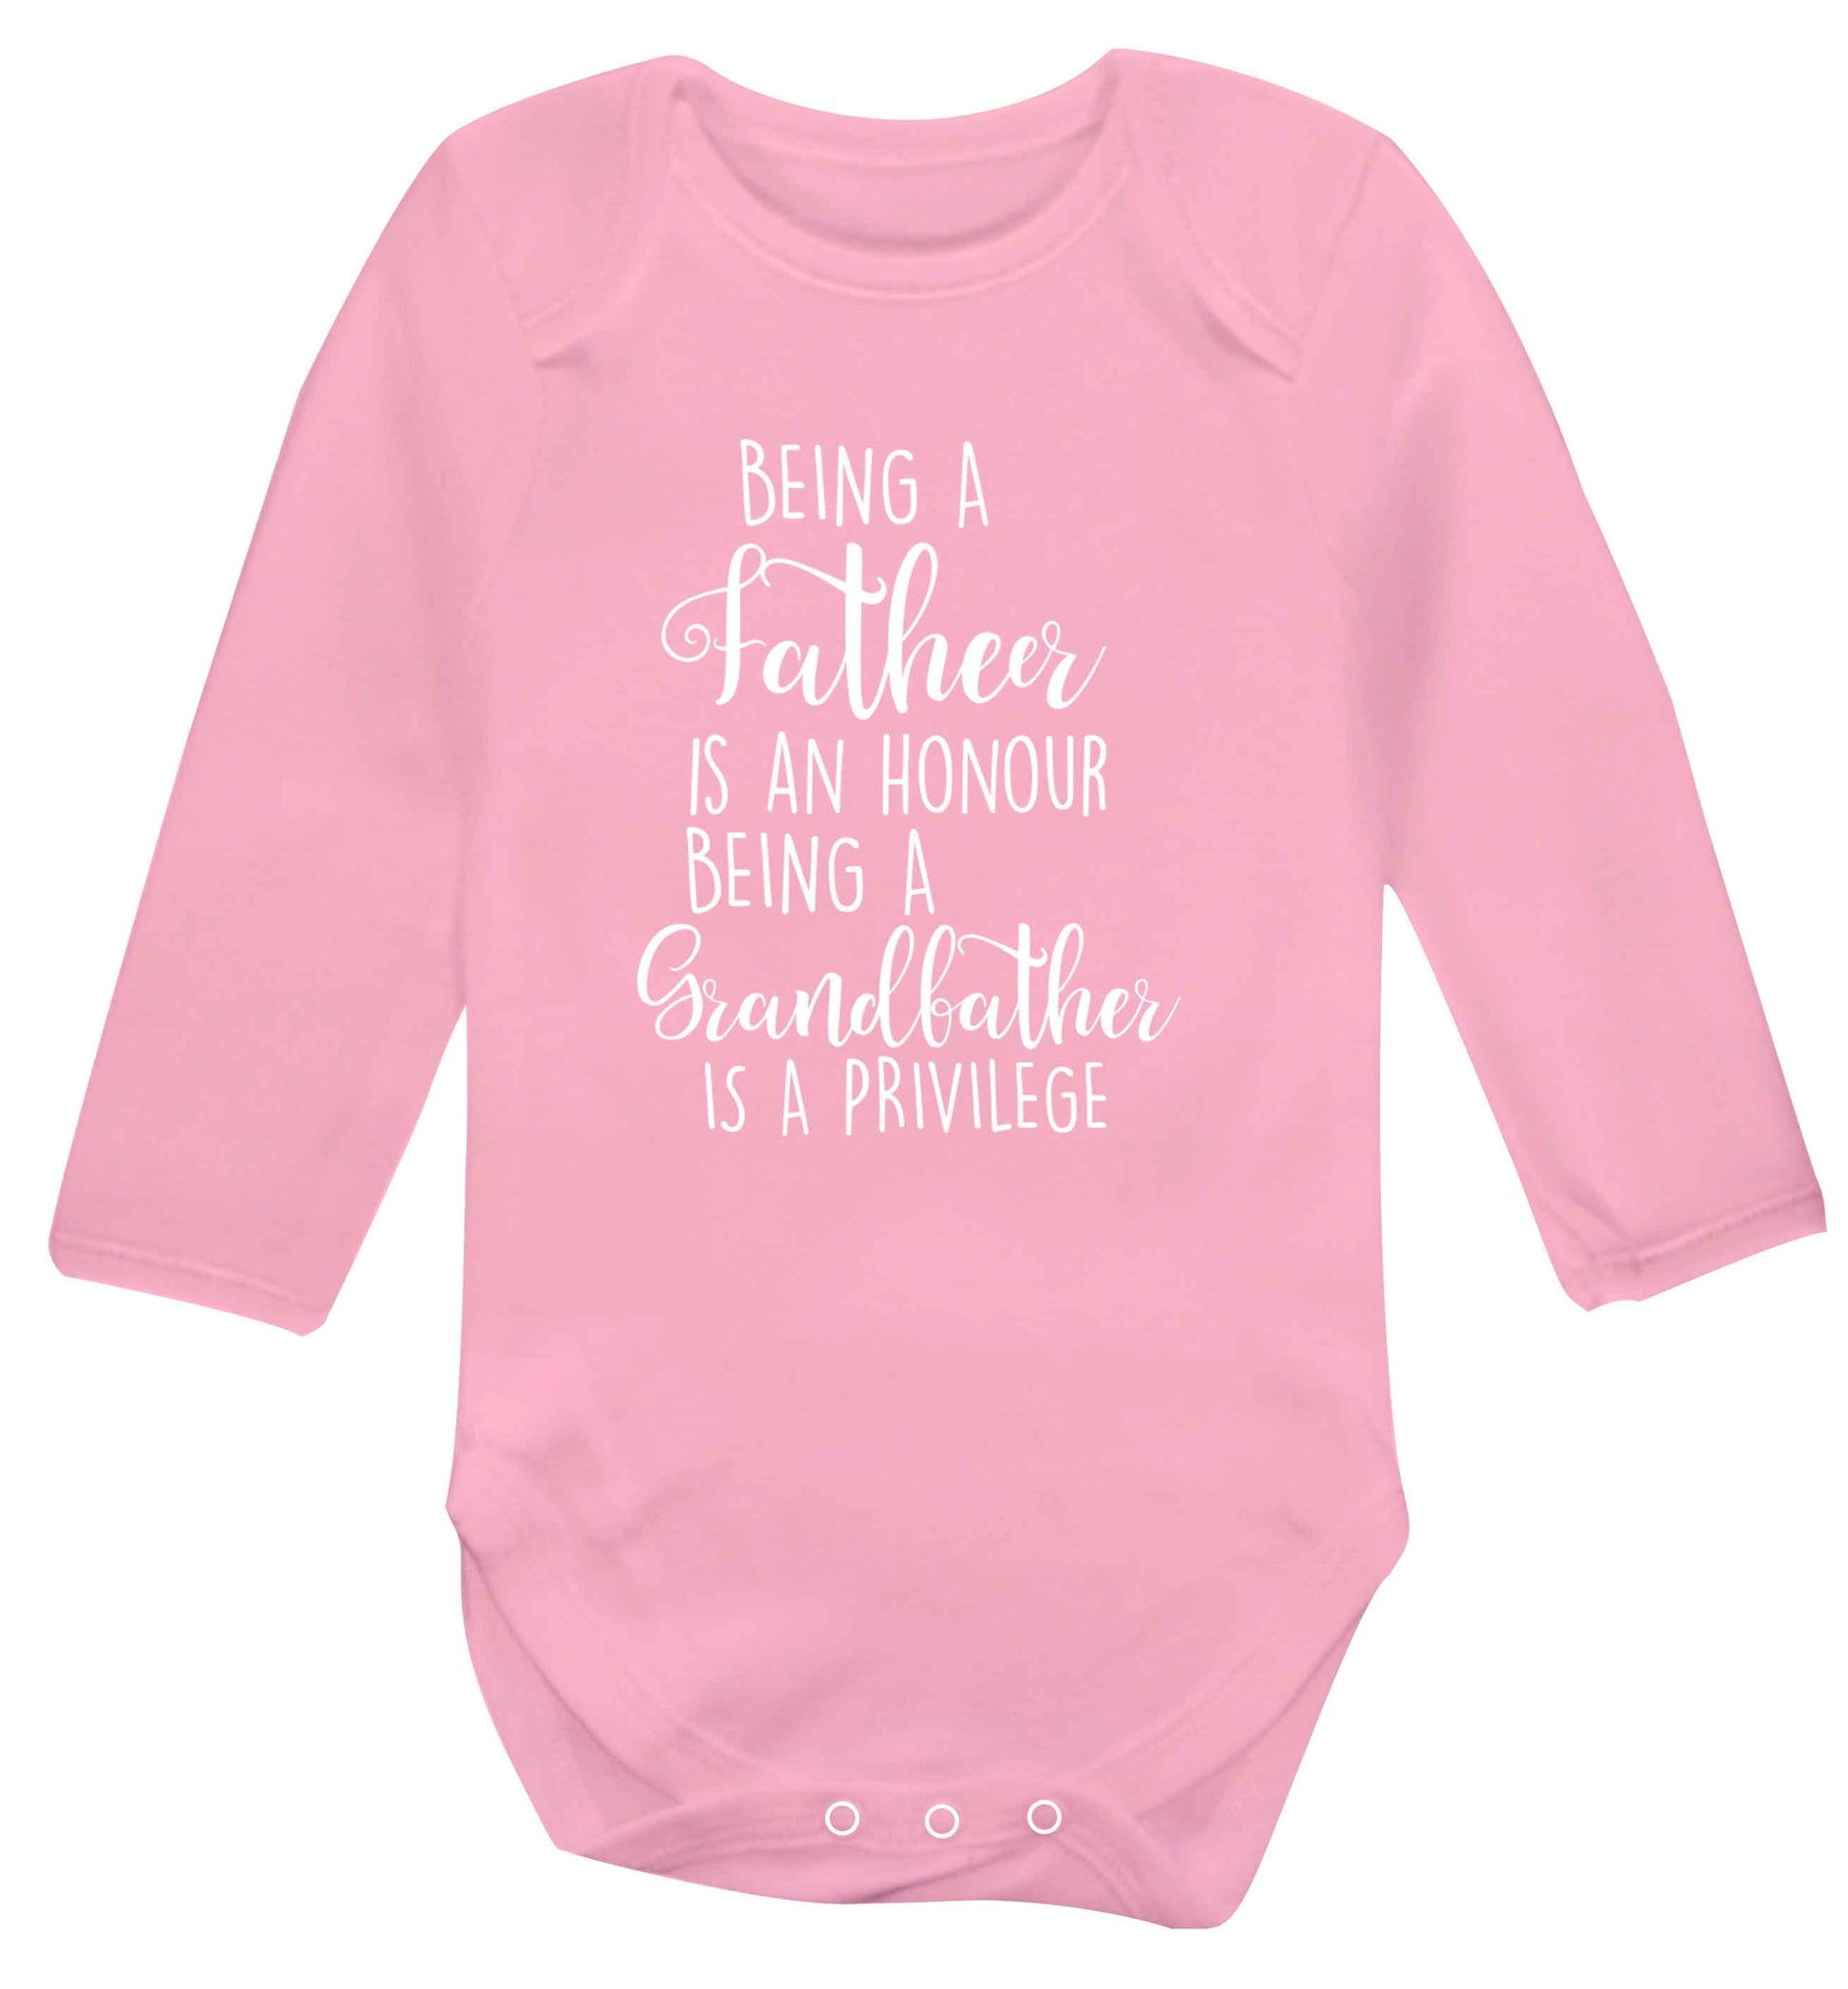 Being a father is an honour being a grandfather is a privilege Baby Vest long sleeved pale pink 6-12 months